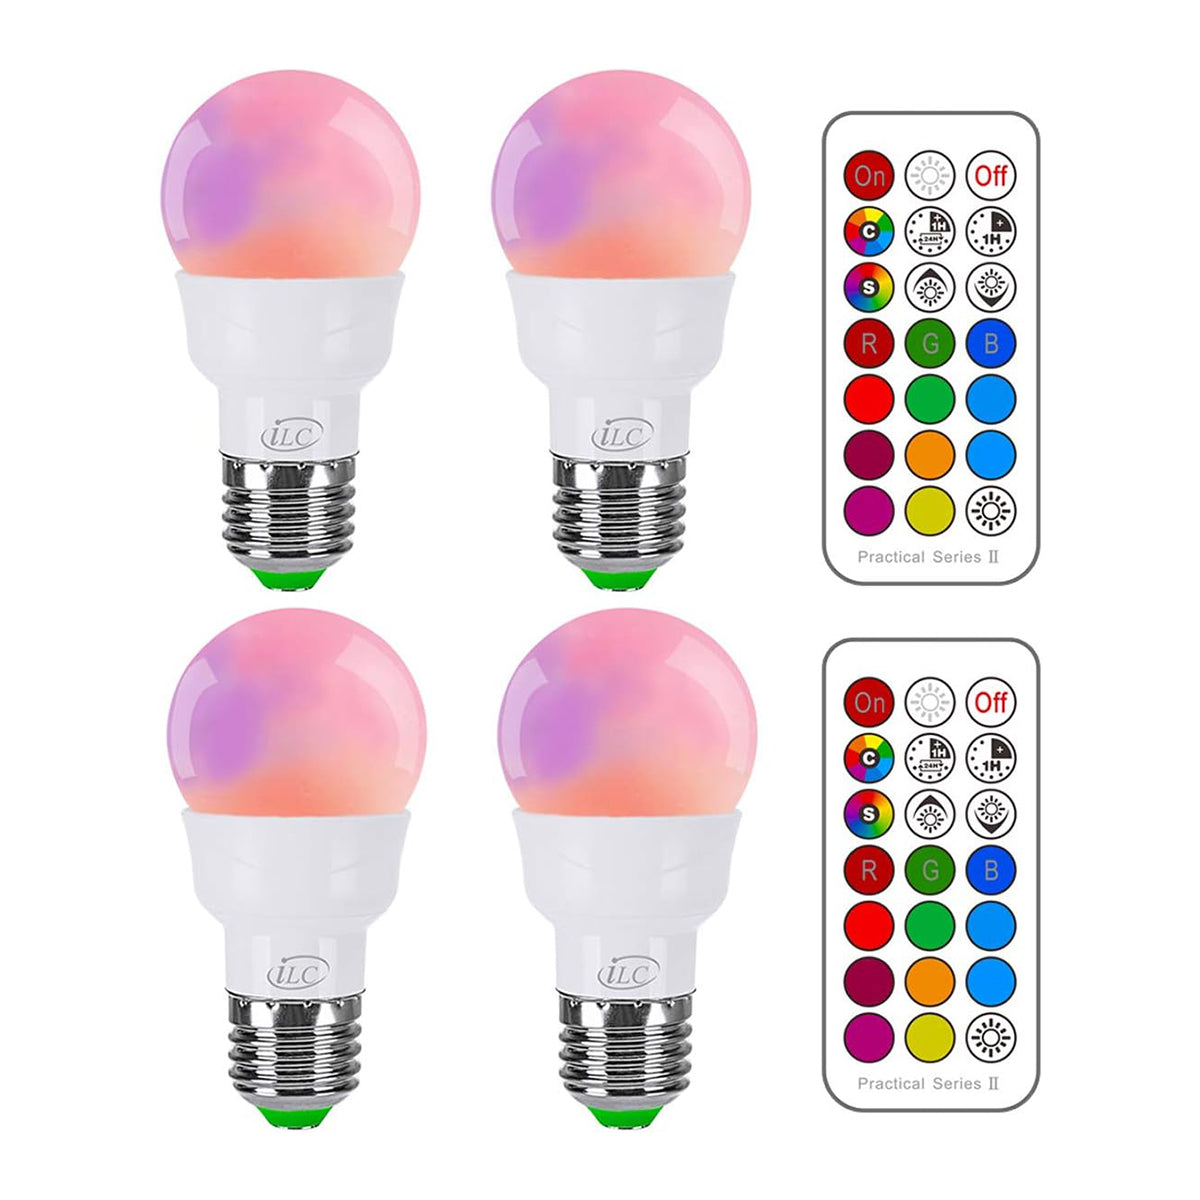 iLC RGB LED Light Bulb, Color Changing 40W Equivalent, 450LM Dimmable 5W E26 Screw Base RGBW, Mood Light Flood Light Bulb - 12 Color Choices - Timing Infrared Remote Control Included (4 Pack)